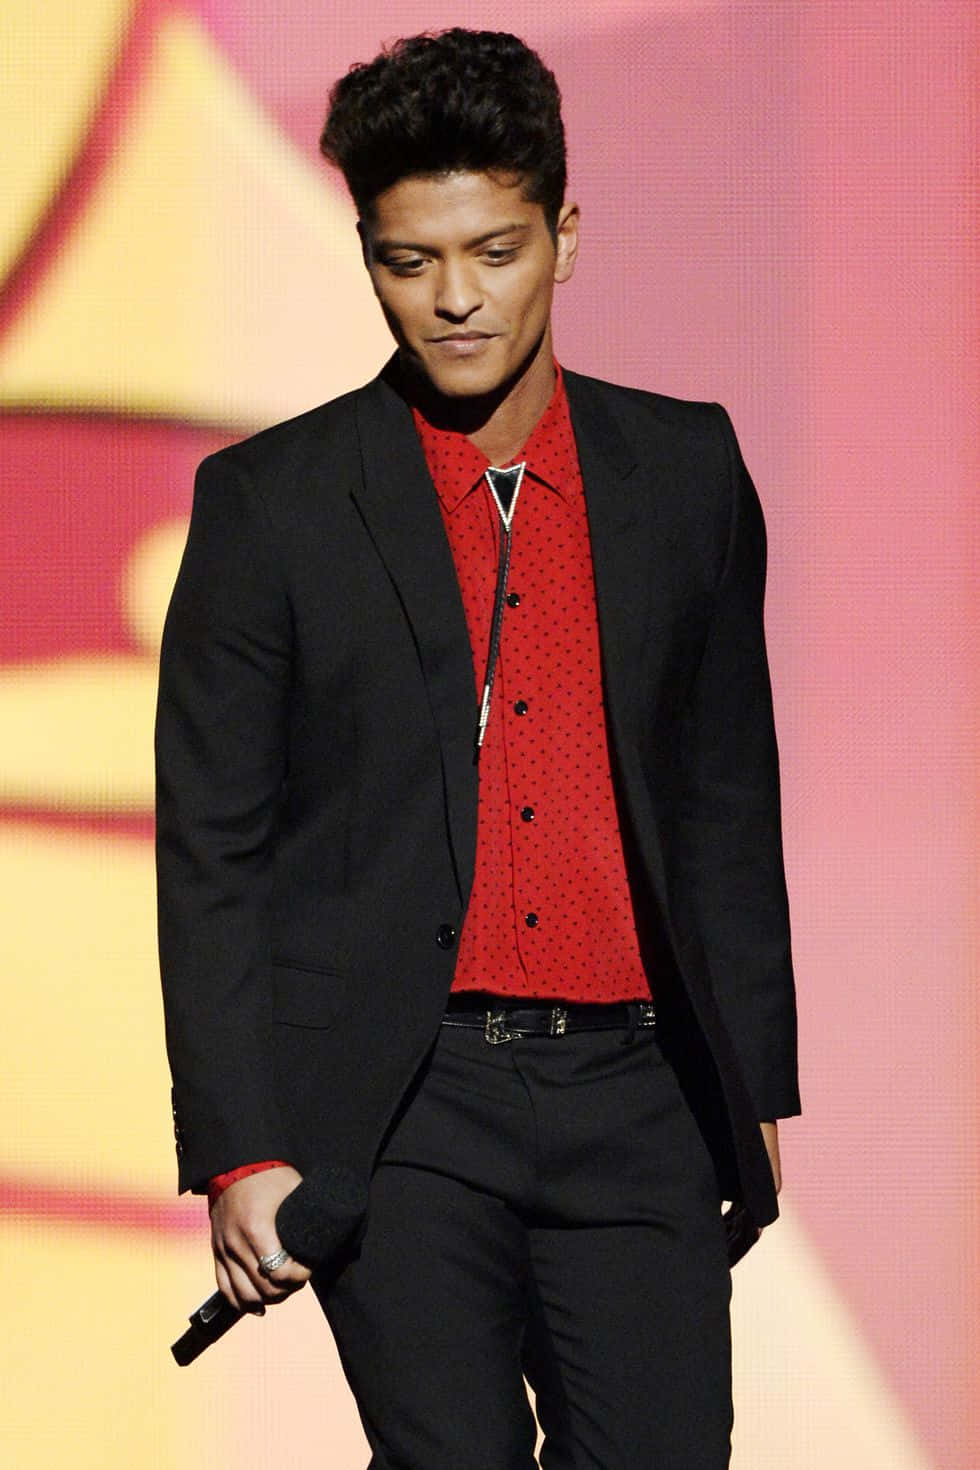 A Man In A Suit And Red Shirt Walking Down The Stage